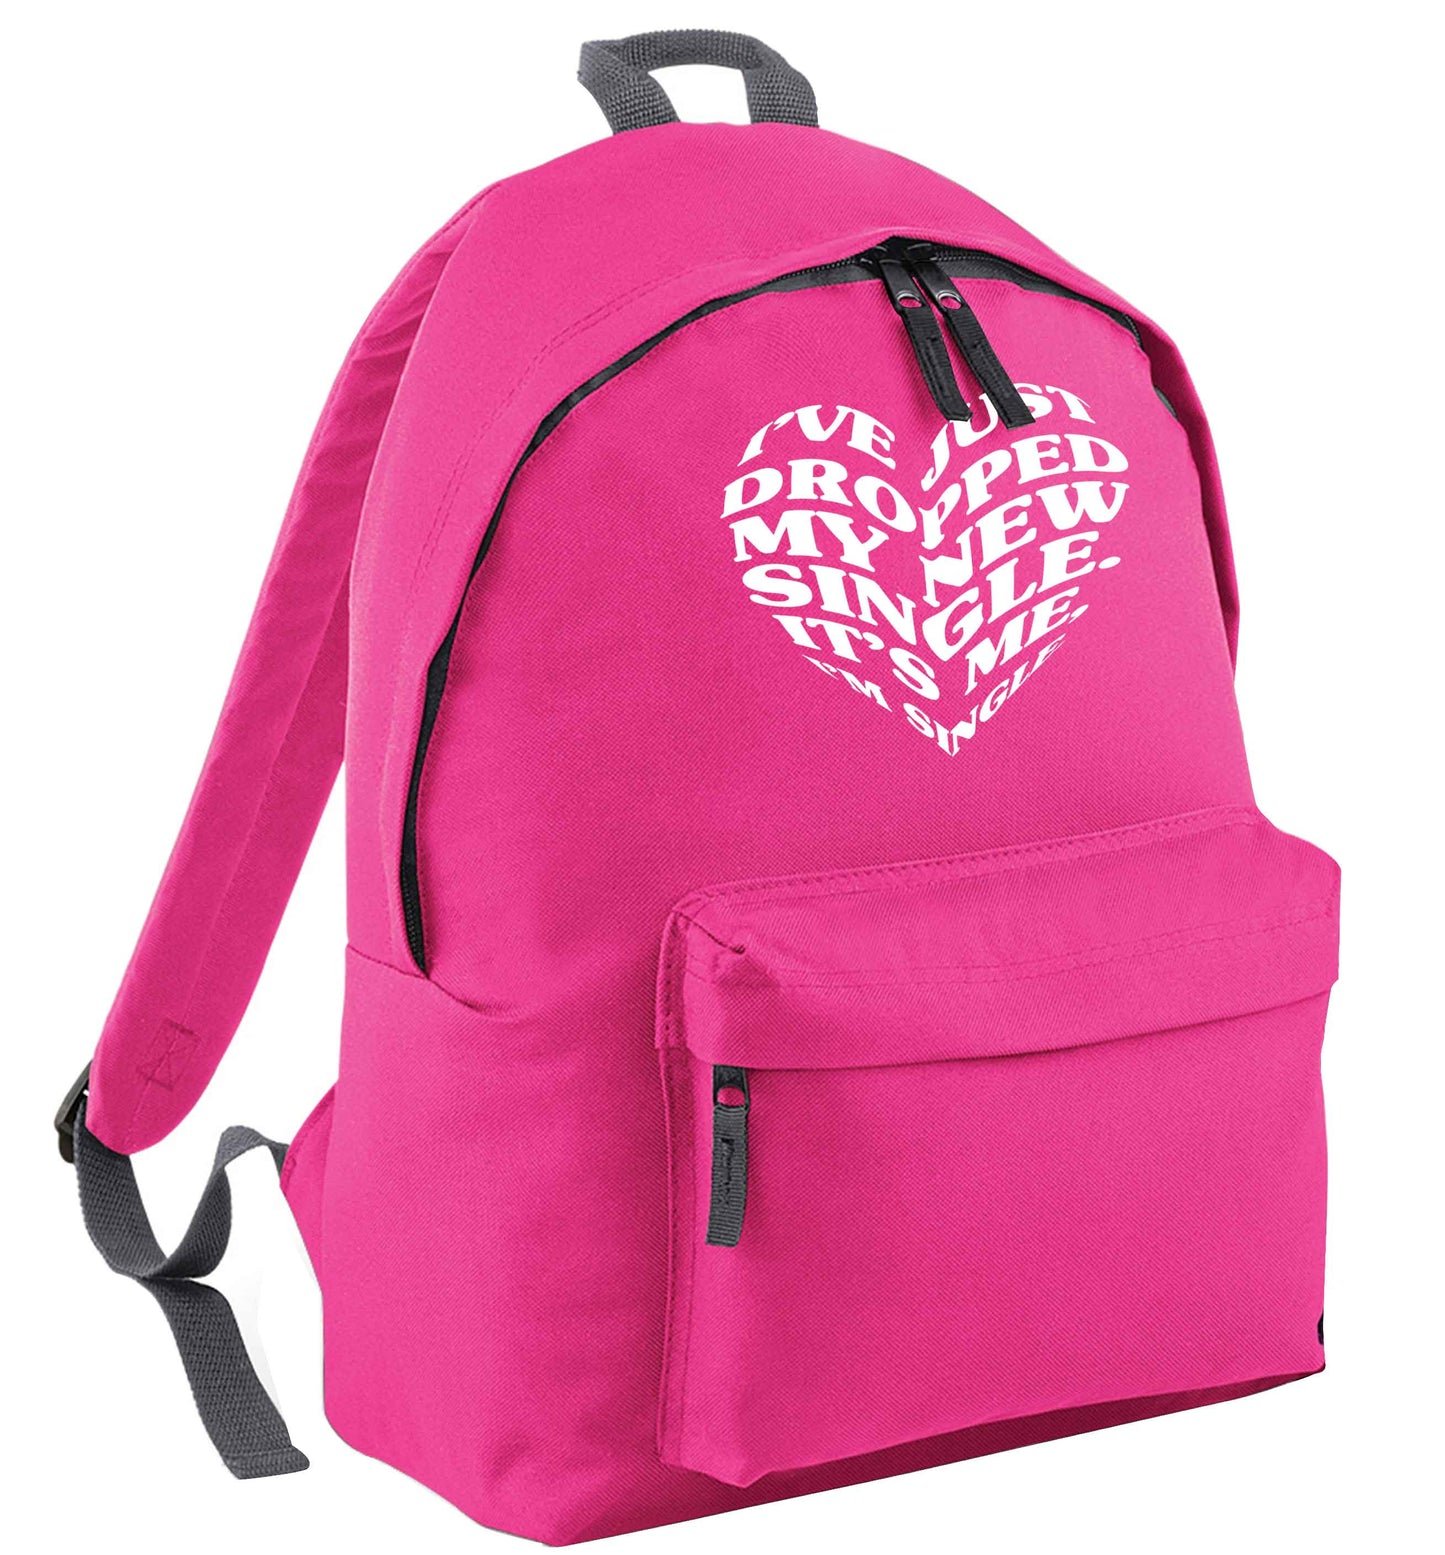 I've just dropped my new single it's me I'm single pink adults backpack